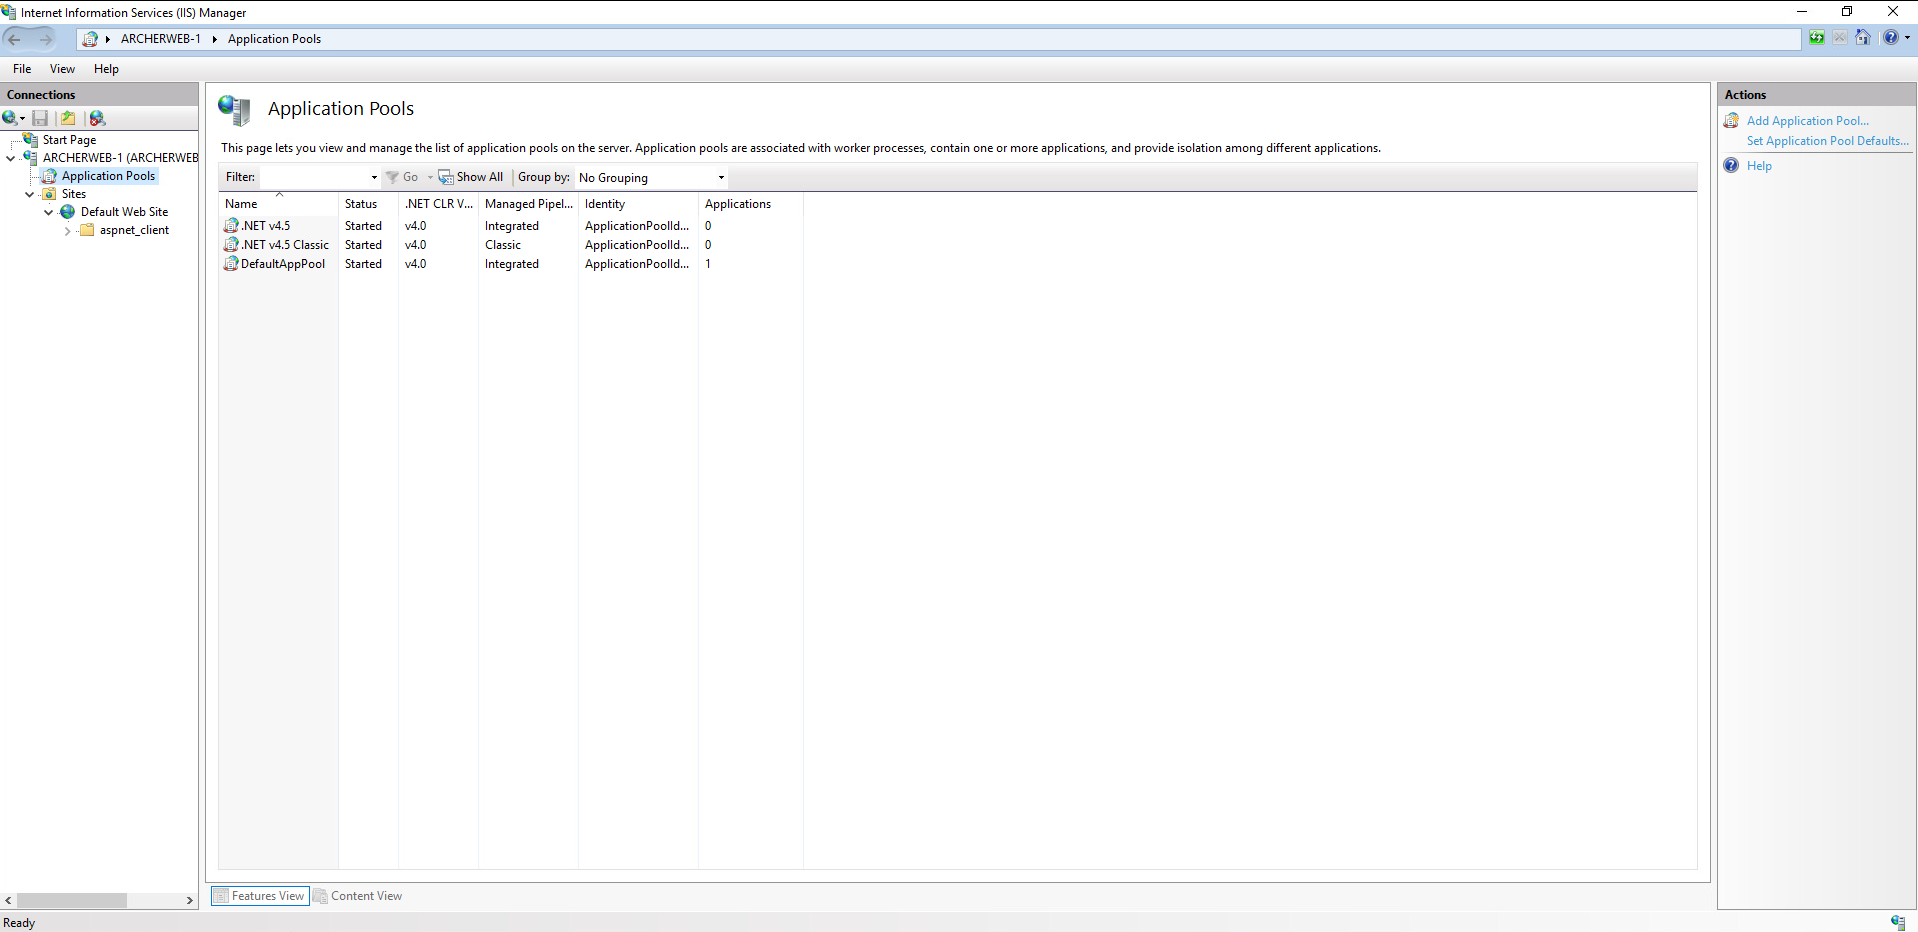 Screenshot of the Application Pools settings for ARCHERWEB-1 Home in the IIS application